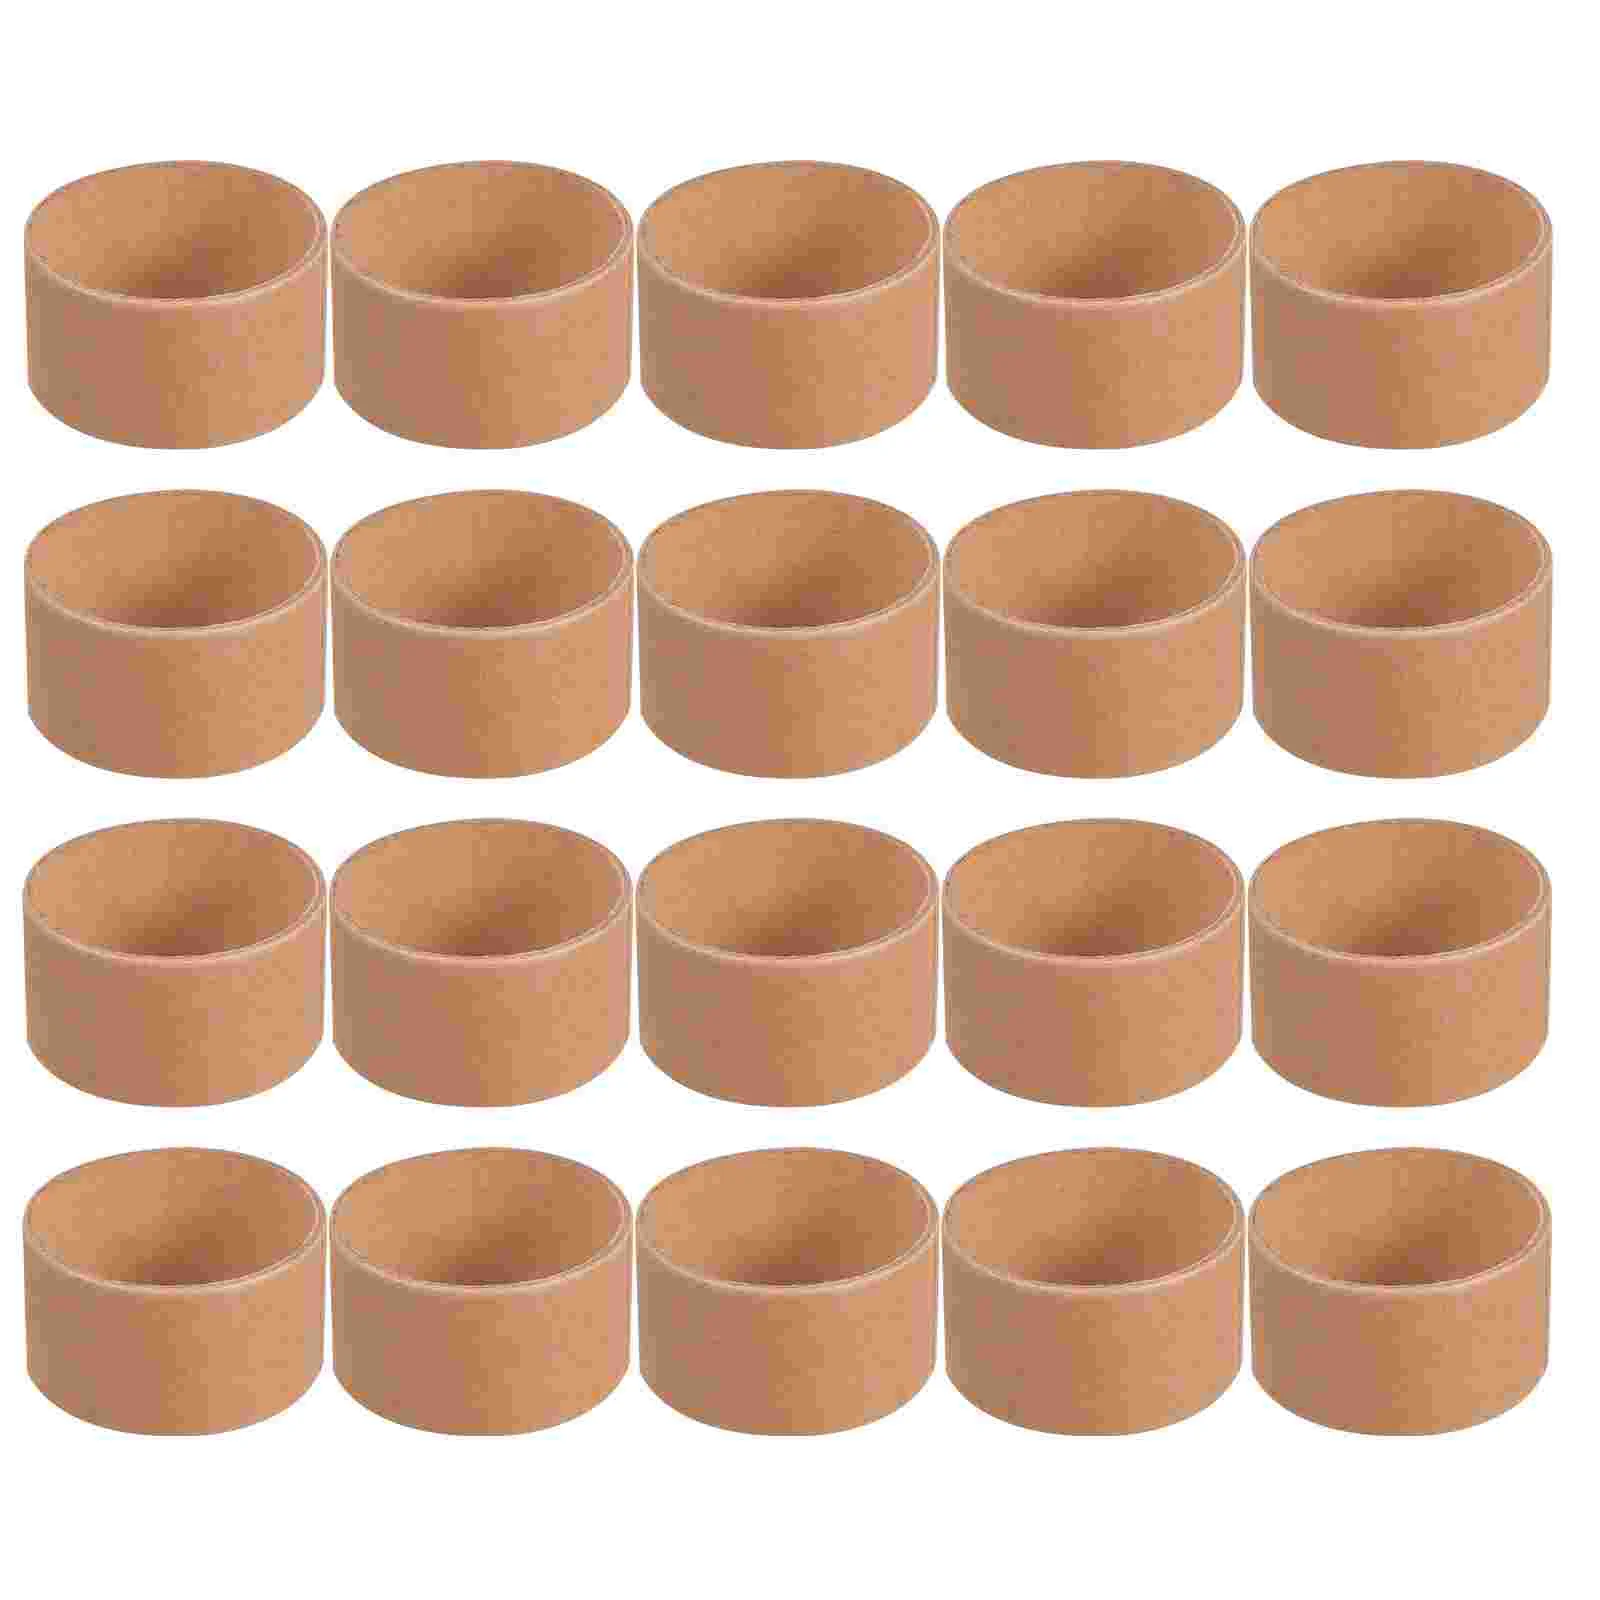 Paper Tubes Tube Cardboard Diy Crafts Roll Toilet Craft Brown Hand Core Drawing Rolls Kraft Art Towel Small Empty Round Thin For